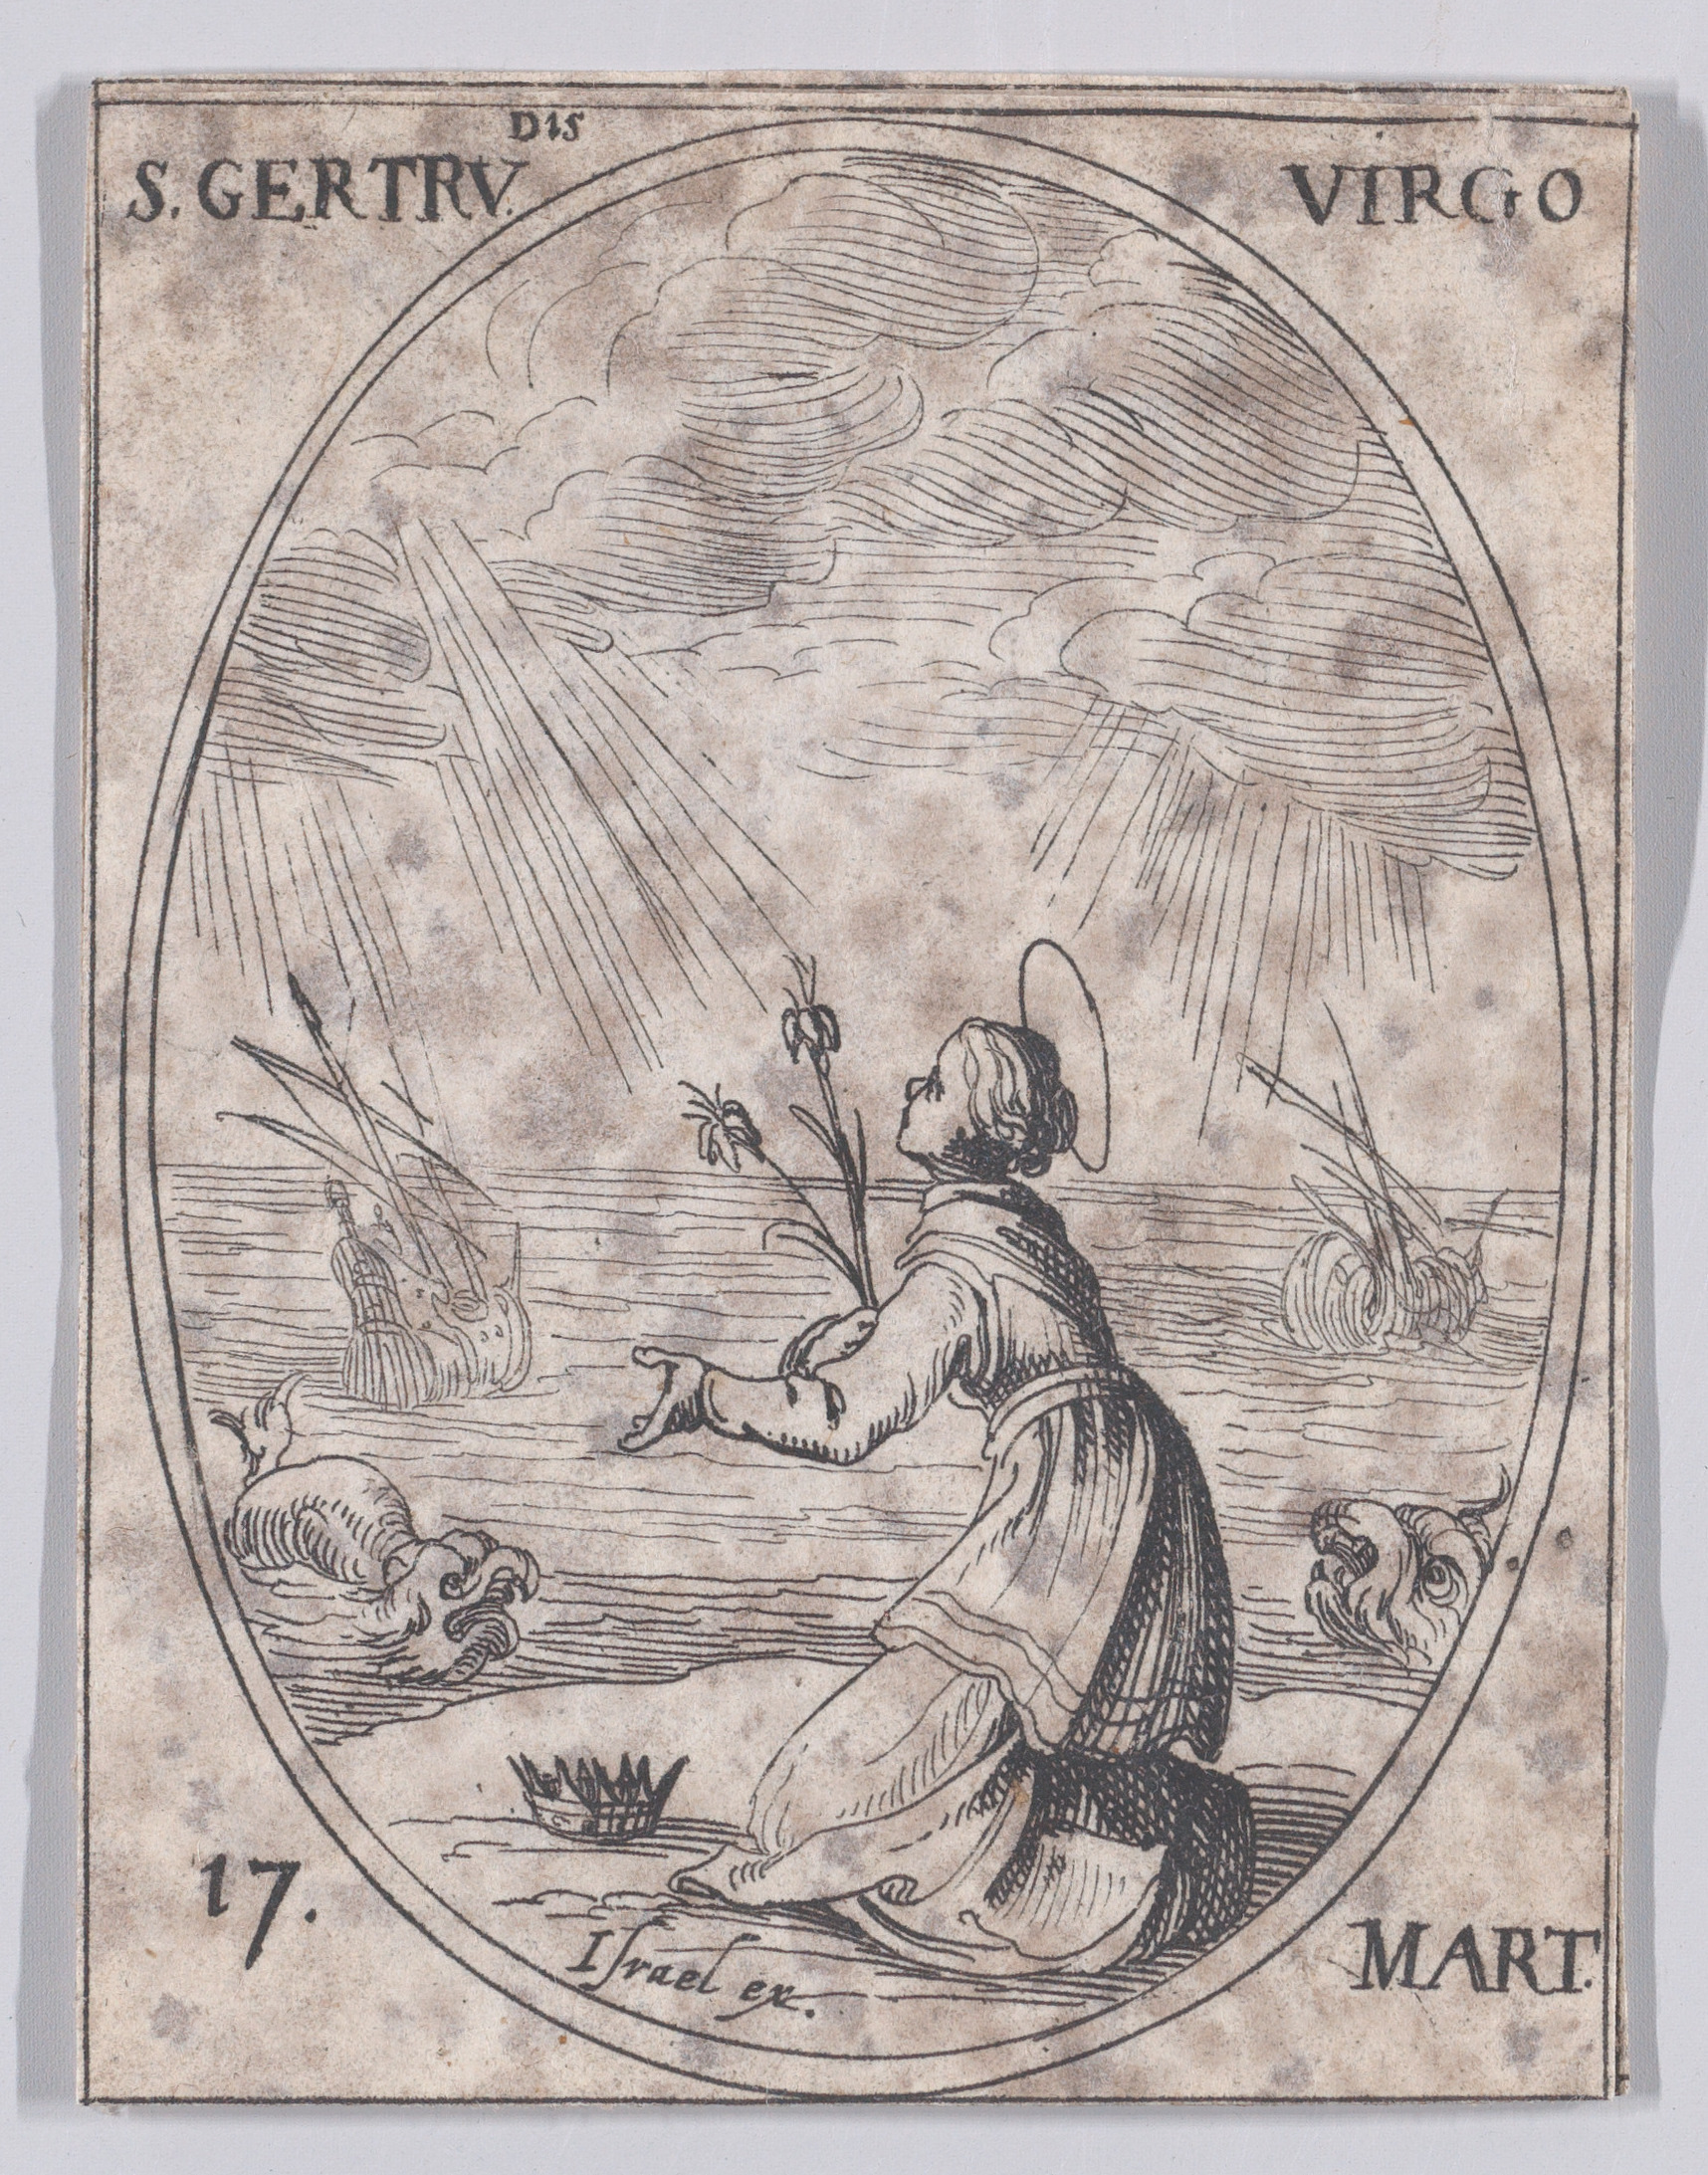 Ste. Gertrude, vierge (St. Gertrude, Virgin), March 17th, from Les Images De Tous Les Saincts et Saintes de L'Année (Images of All of the Saints and Religious Events of the Year), Jacques Callot (French, Nancy 1592–1635 Nancy), Etching; second state of two (Lieure)